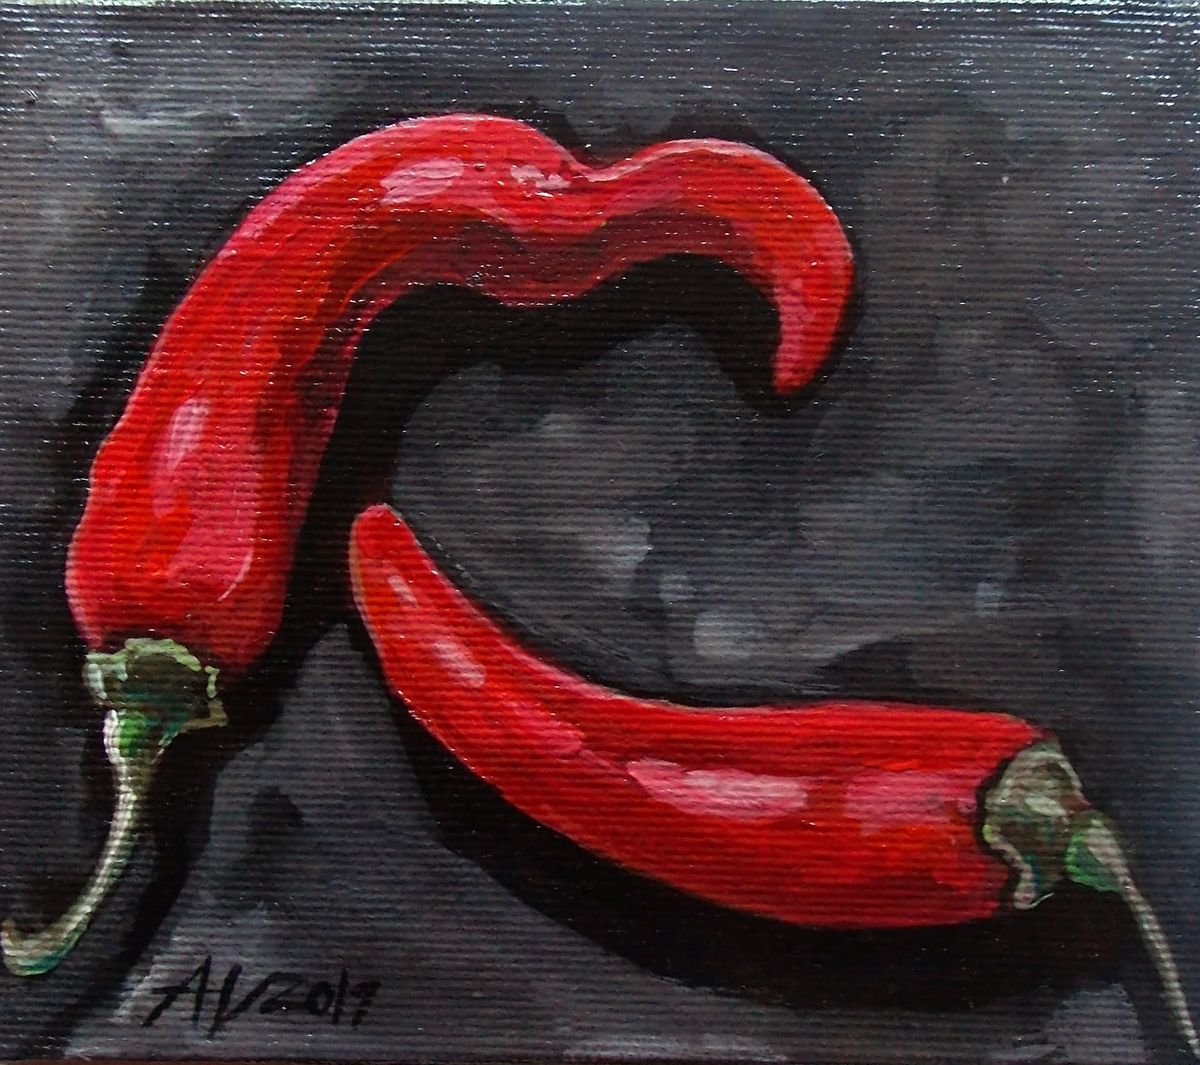 Red Hot Chili Peppers by Adriana Vasile